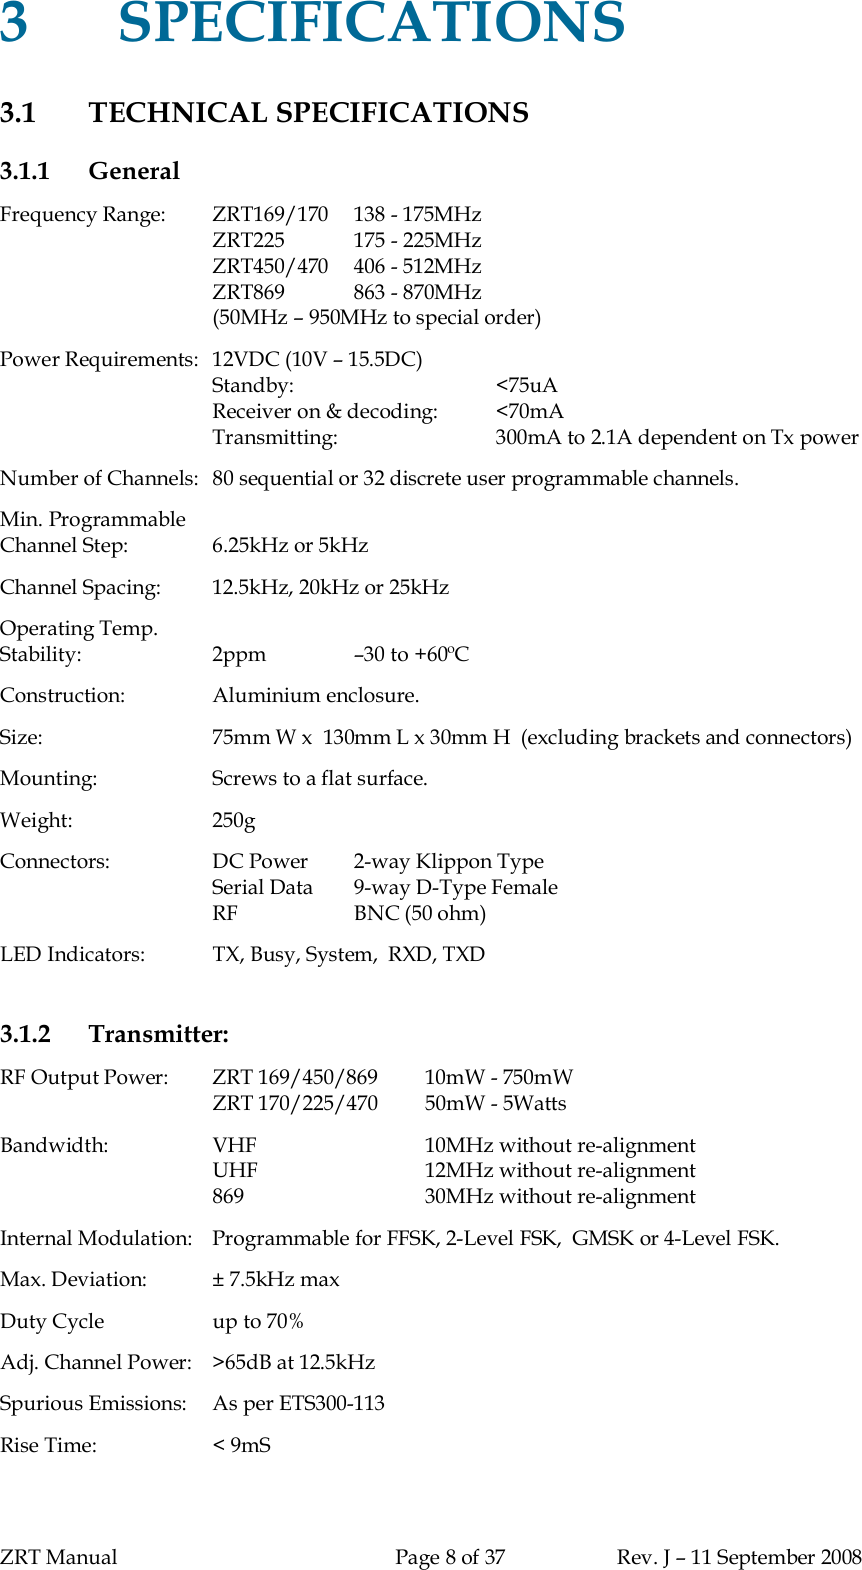 ZRT Manual Page 8 of 37 Rev. J – 11 September 20083SPECIFICATIONS3.1 TECHNICAL SPECIFICATIONS3.1.1 GeneralFrequency Range:   ZRT169/170  138 - 175MHzZRT225 175 - 225MHzZRT450/470   406 - 512MHzZRT869 863 - 870MHz(50MHz – 950MHz to special order)Power Requirements:  12VDC (10V – 15.5DC)Standby: &lt;75uAReceiver on &amp; decoding: &lt;70mATransmitting: 300mA to 2.1A dependent on Tx powerNumber of Channels:  80 sequential or 32 discrete user programmable channels.Min. ProgrammableChannel Step: 6.25kHz or 5kHzChannel Spacing: 12.5kHz, 20kHz or 25kHzOperating Temp.Stability: 2ppm –30 to +60ºCConstruction: Aluminium enclosure.Size: 75mm W x  130mm L x 30mm H  (excluding brackets and connectors)Mounting: Screws to a flat surface.Weight: 250gConnectors: DC Power 2-way Klippon TypeSerial Data  9-way D-Type FemaleRF BNC (50 ohm)LED Indicators: TX, Busy, System,  RXD, TXD3.1.2 Transmitter:RF Output Power:   ZRT 169/450/869 10mW - 750mWZRT 170/225/470 50mW - 5WattsBandwidth: VHF 10MHz without re-alignmentUHF 12MHz without re-alignment869 30MHz without re-alignmentInternal Modulation:   Programmable for FFSK, 2-Level FSK,  GMSK or 4-Level FSK.Max. Deviation: ± 7.5kHz maxDuty Cycle up to 70%Adj. Channel Power:  &gt;65dB at 12.5kHzSpurious Emissions:  As per ETS300-113Rise Time: &lt; 9mS